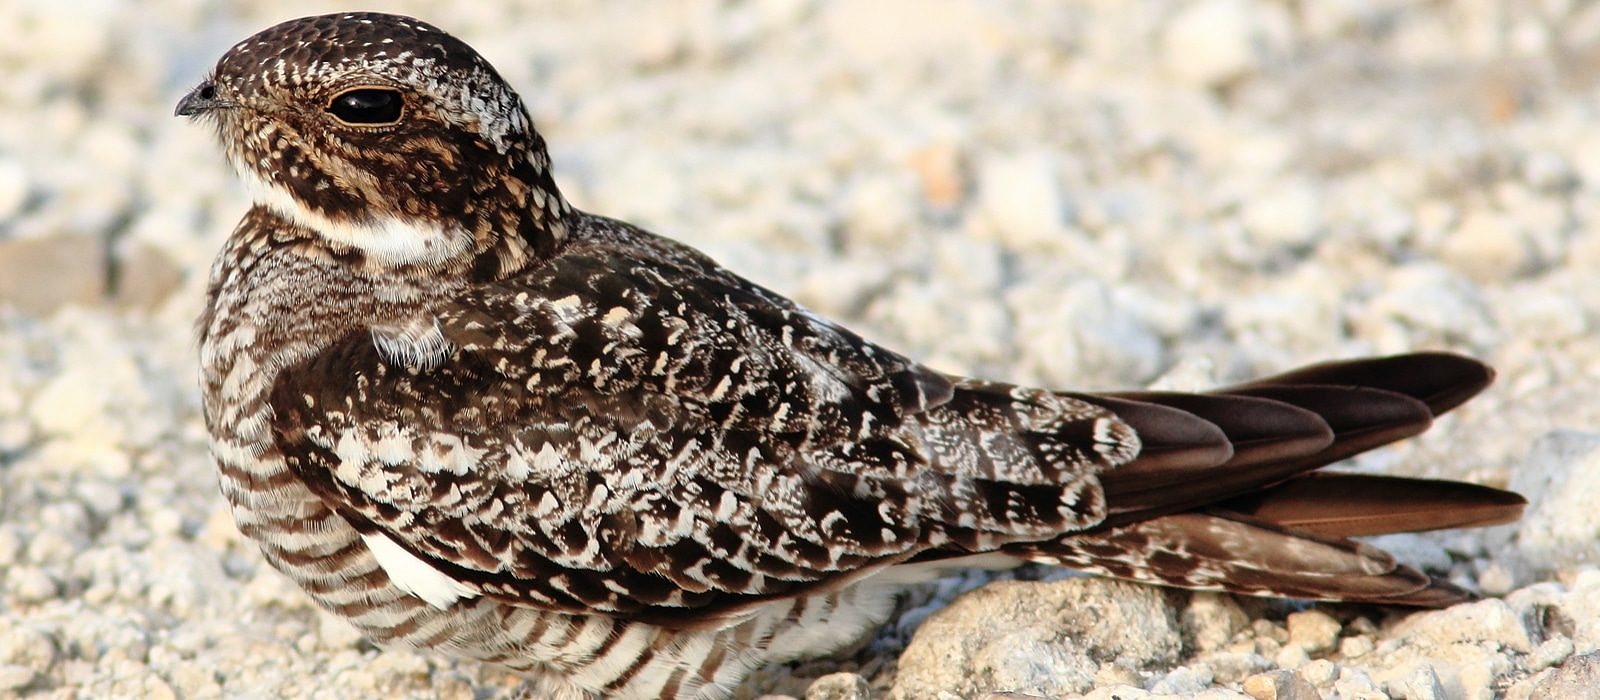 A Common Nighthawk perches on a gravel patch. (photo © Ken Schneider via the Creative Commons)